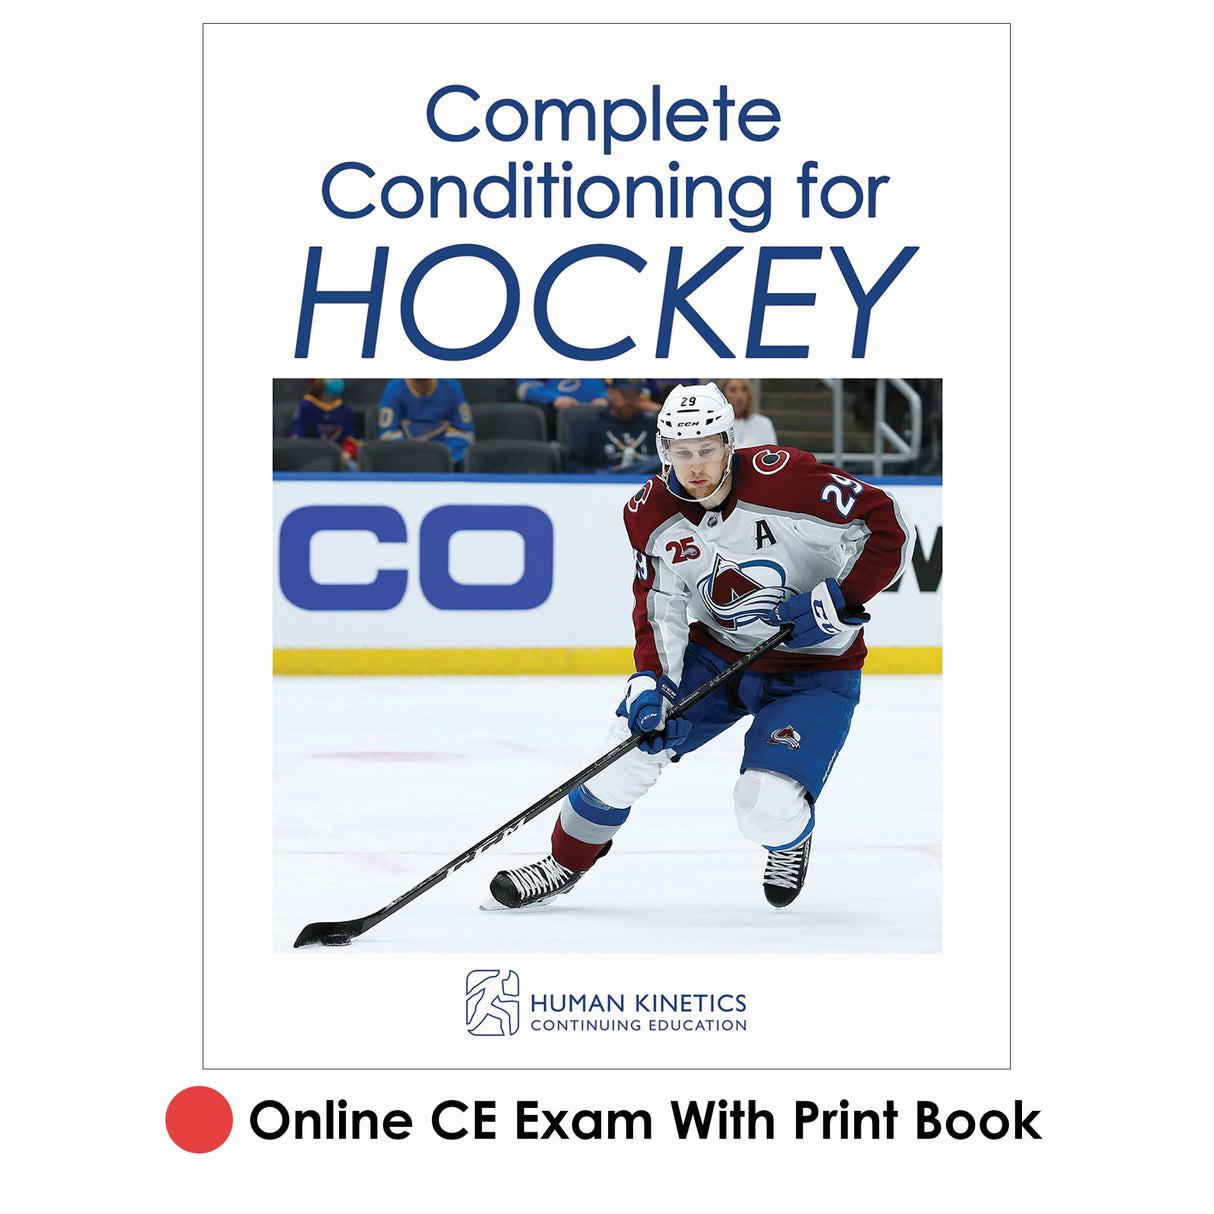 Complete Conditioning for Hockey Online CE Exam With Print Book